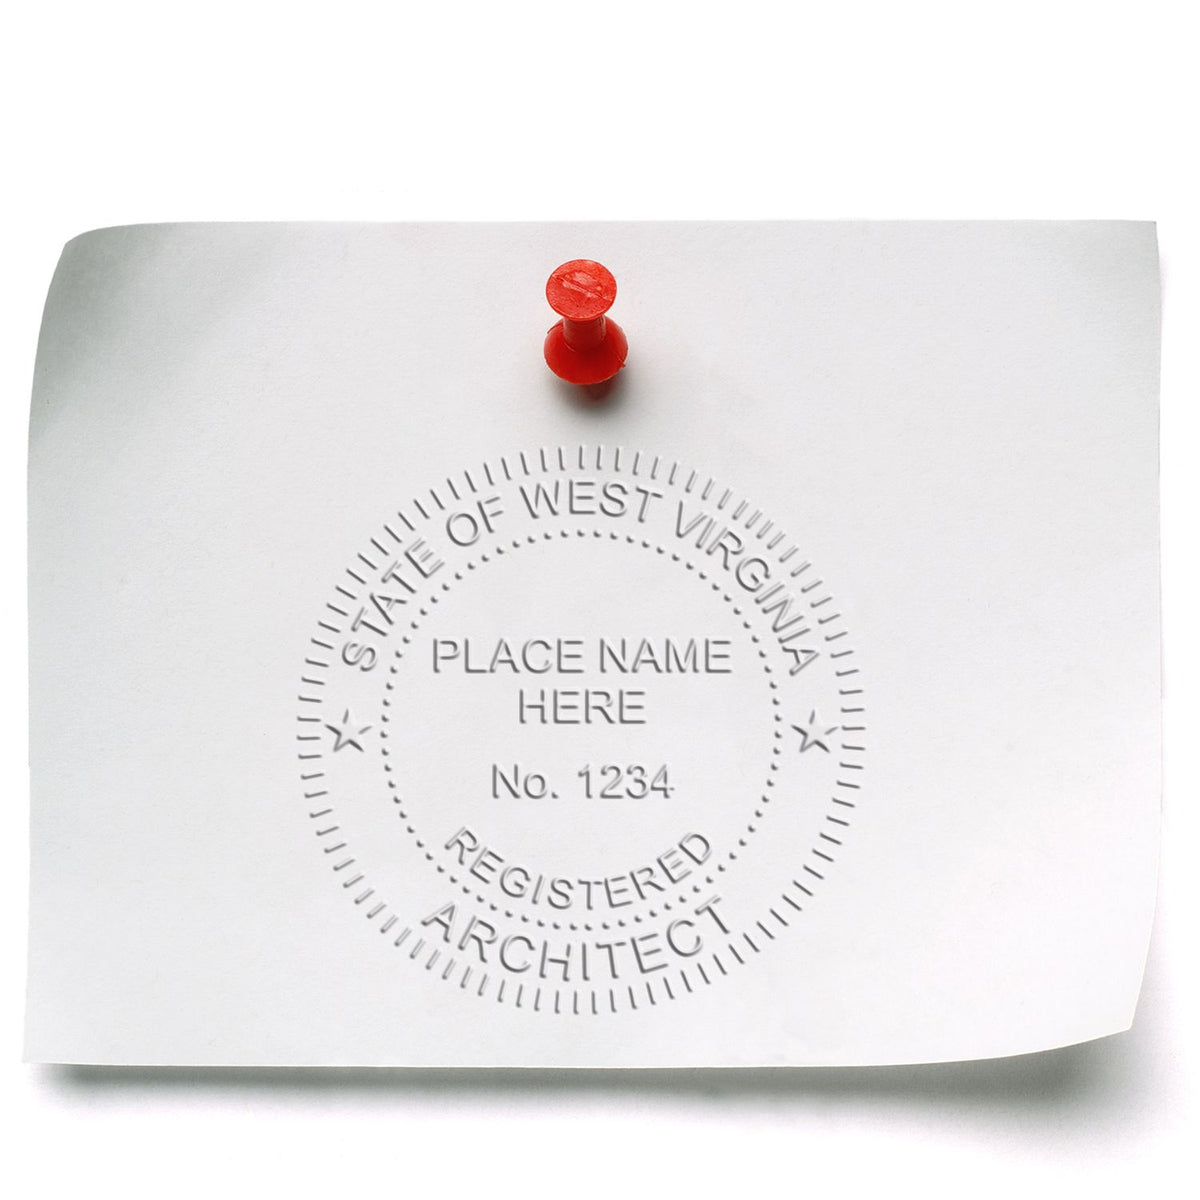 This paper is stamped with a sample imprint of the Handheld West Virginia Architect Seal Embosser, signifying its quality and reliability.